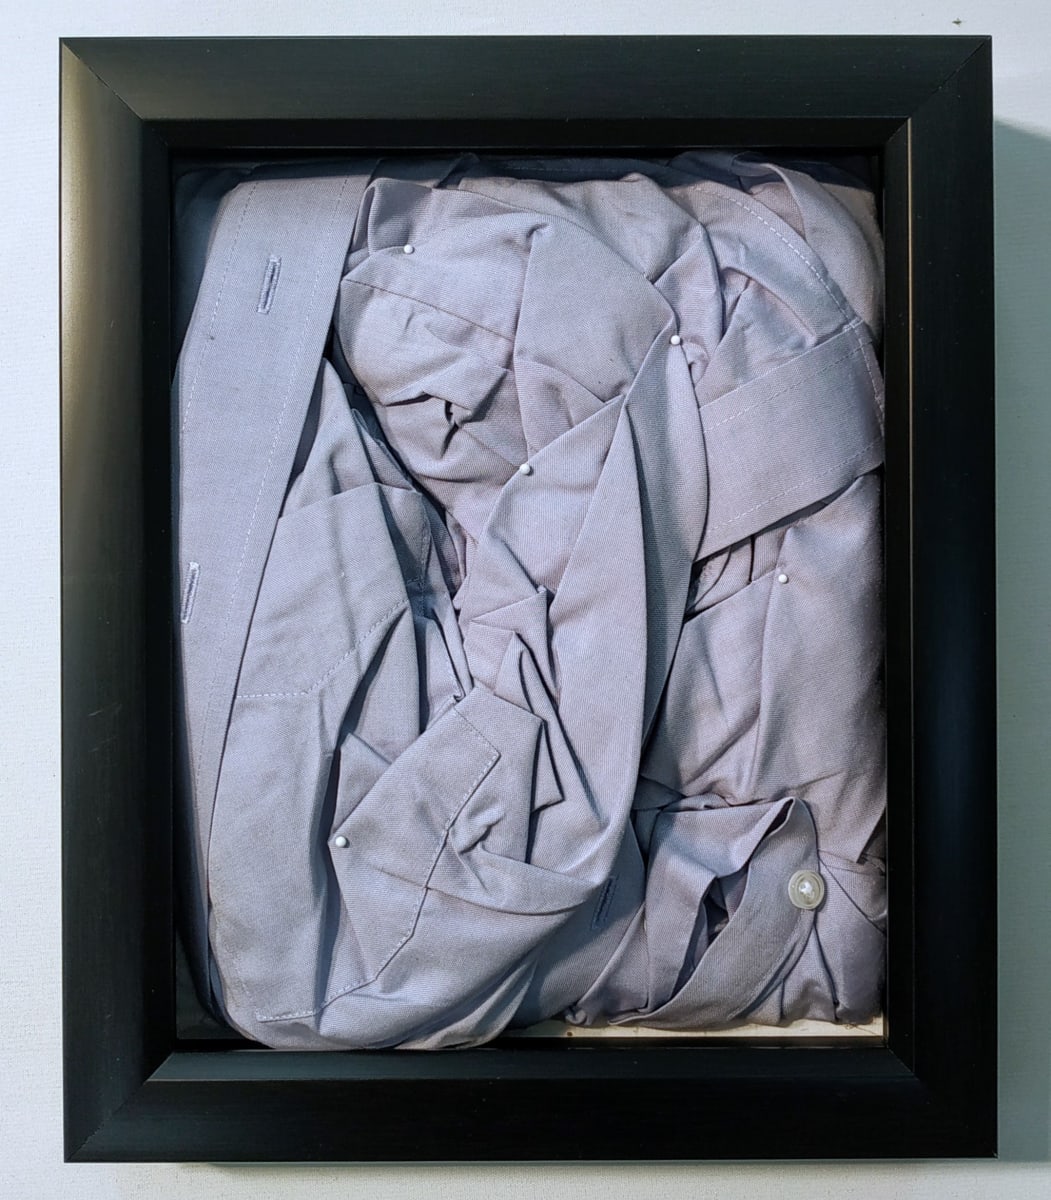 Boxed Shirt by Lesley Turner  Image: Lesley Turner, 'Boxed Shirt', 2022, 12"x10". Men's cotton business shirts, plastic buttons, metal pins. Once, fine shirts arrived folded in boxes, pins securing the wearer’s power and prestige.